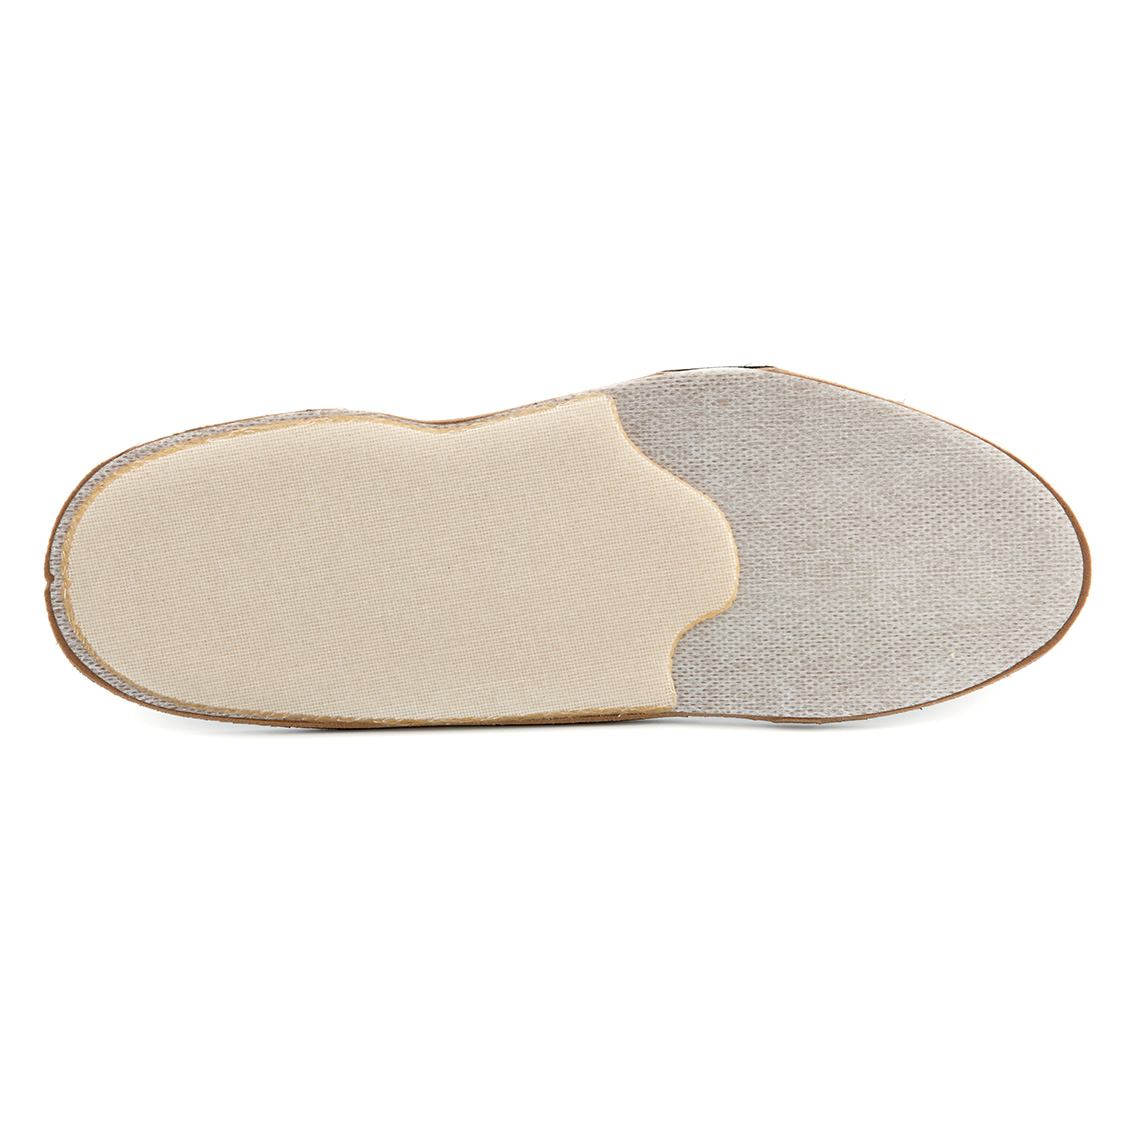 Semi-finished Diabet insole for sensitive feet in Resin for thermoforming Men size 36/37 1 pair